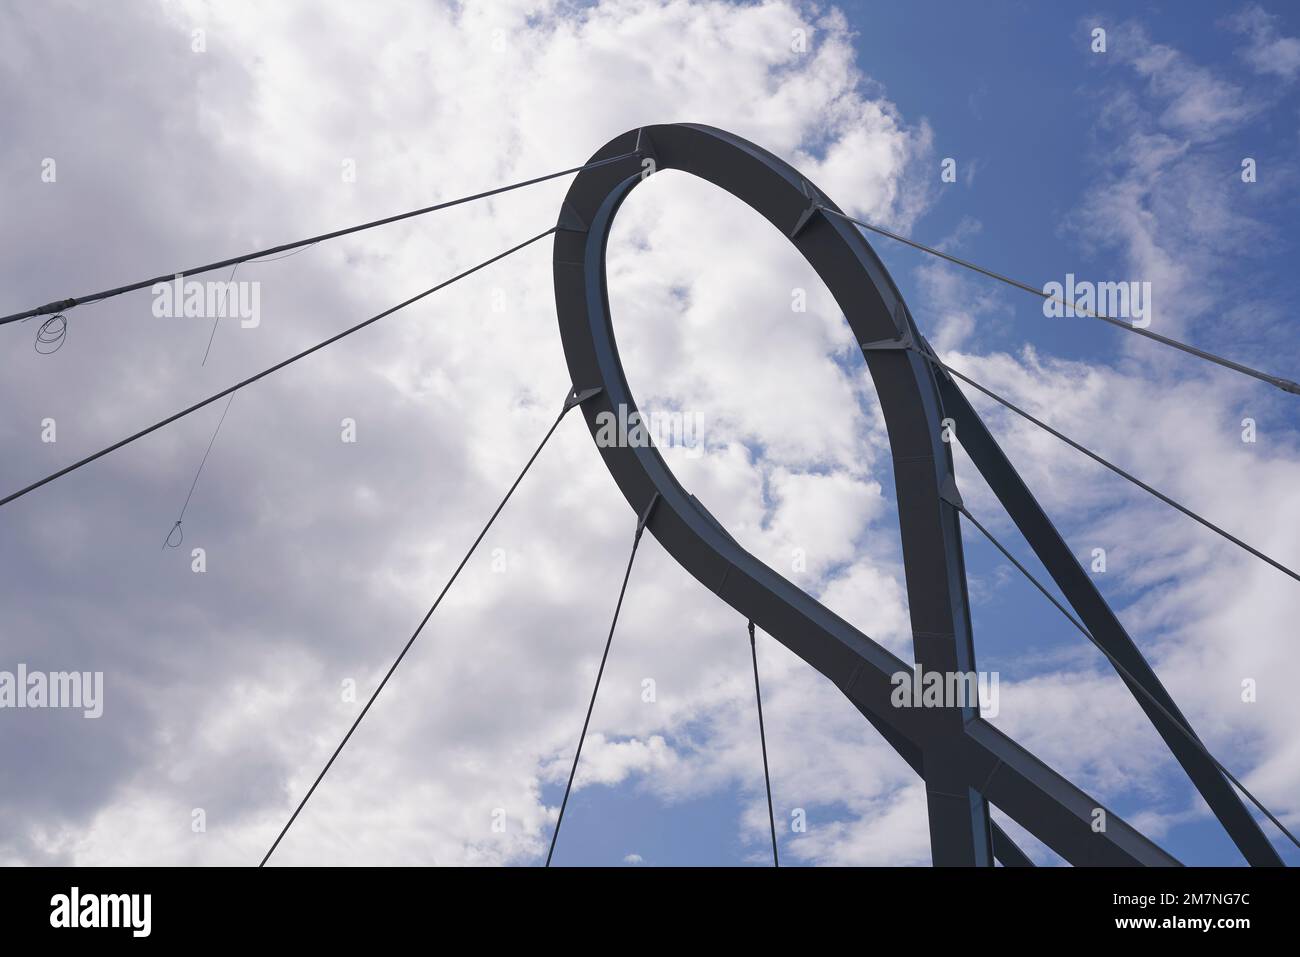 support for cable-stayed circular footbridge against cloudy sky, Aveiro, Portugal Stock Photo